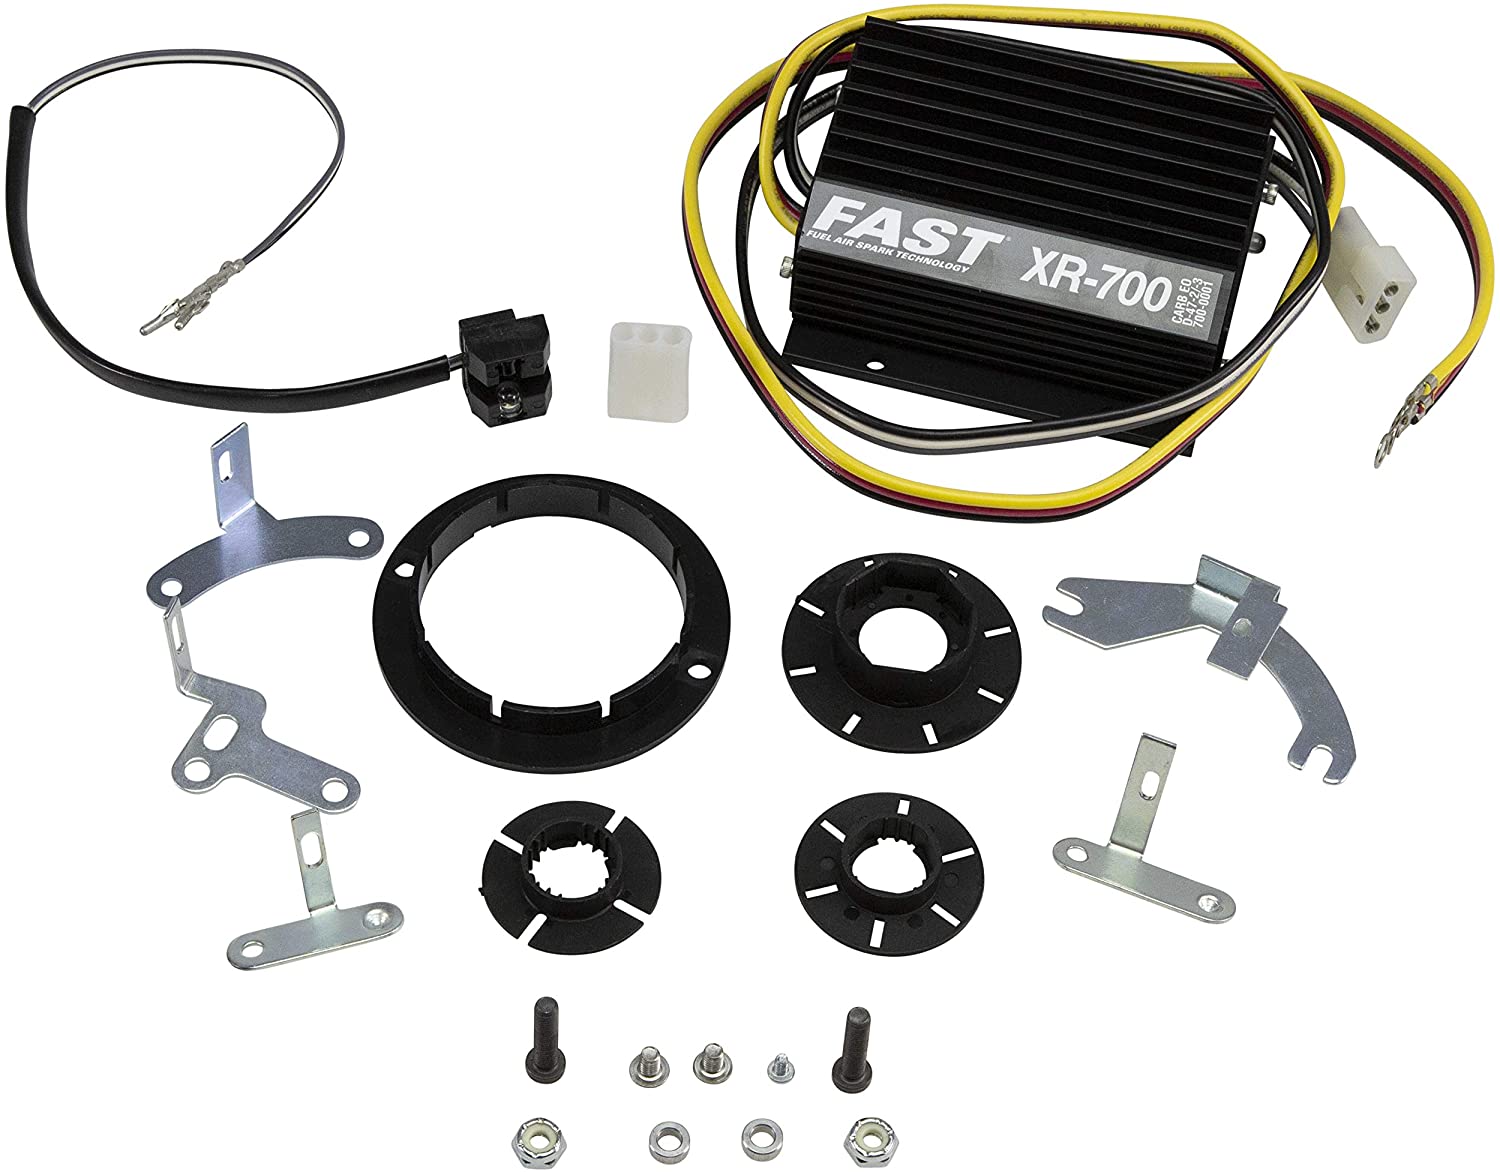 FAST 700-0226 XR-700 Points-to-Electronic Ignition Conversion Kit for Domestic 4, 6 and 8 Cylinder Engines and VW/Bosch 009 Distributors